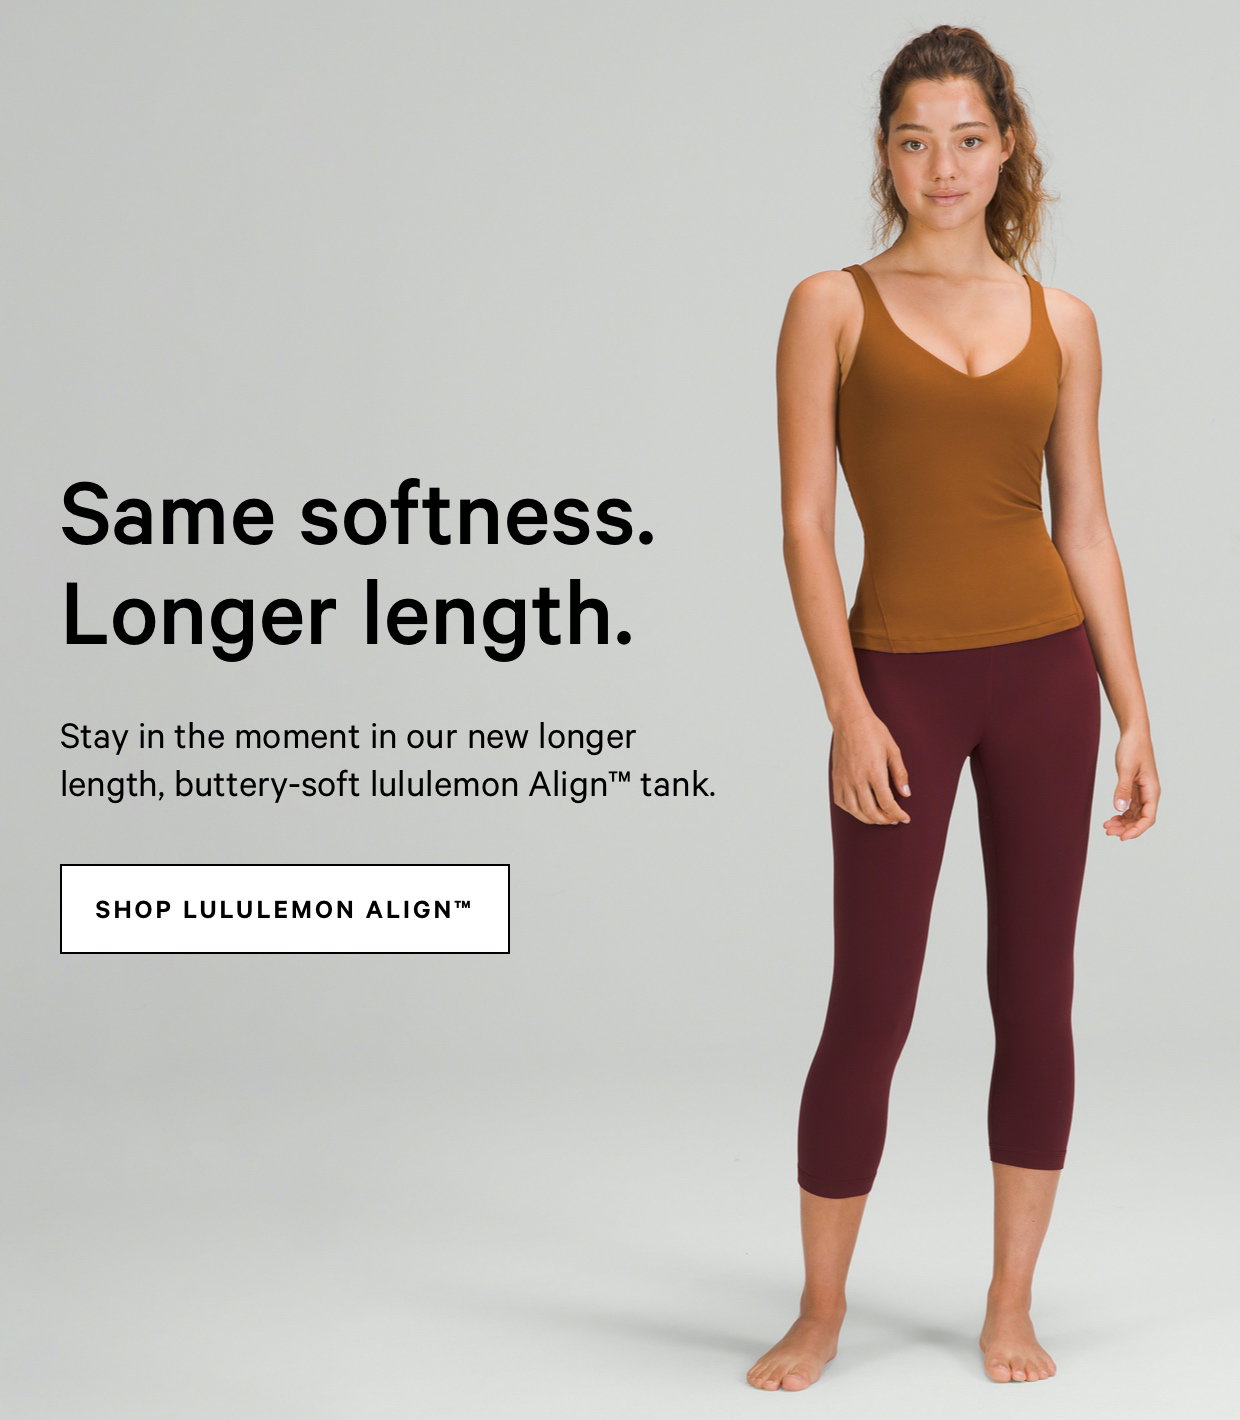 lululemon: Our Align Jogger makes every moment comfortable